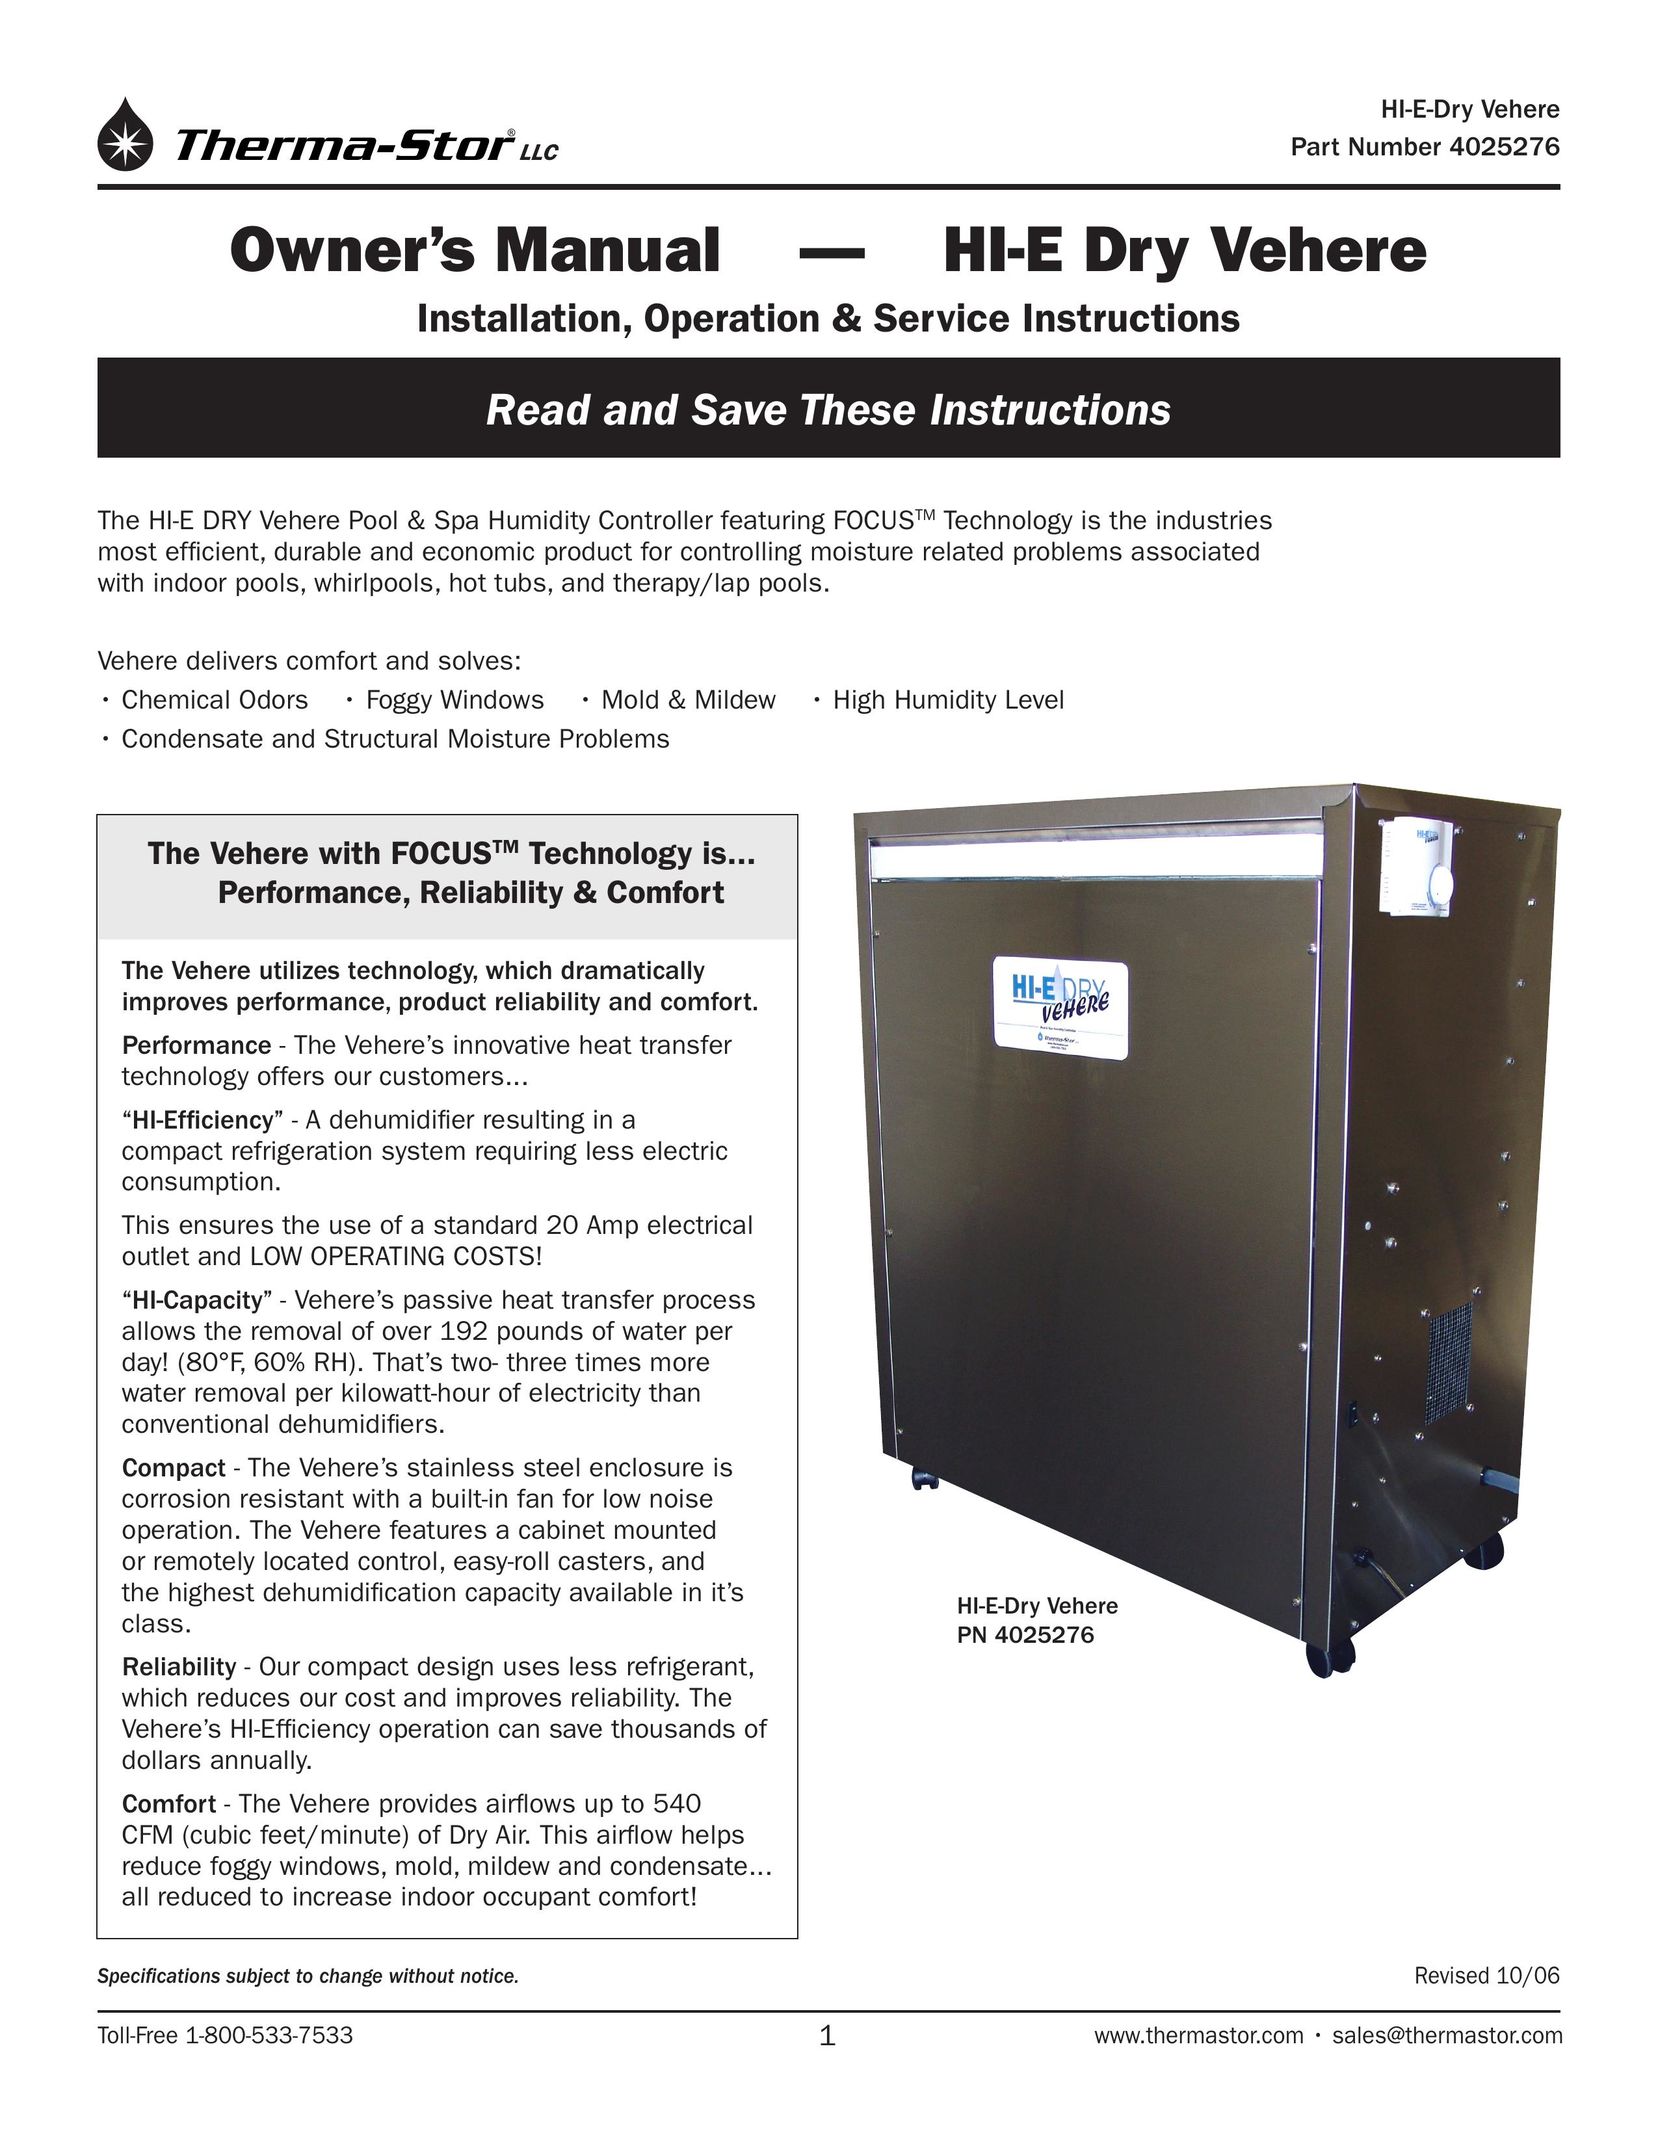 Therma-Stor Products Group HI-E Dry Vehere Dehumidifier User Manual